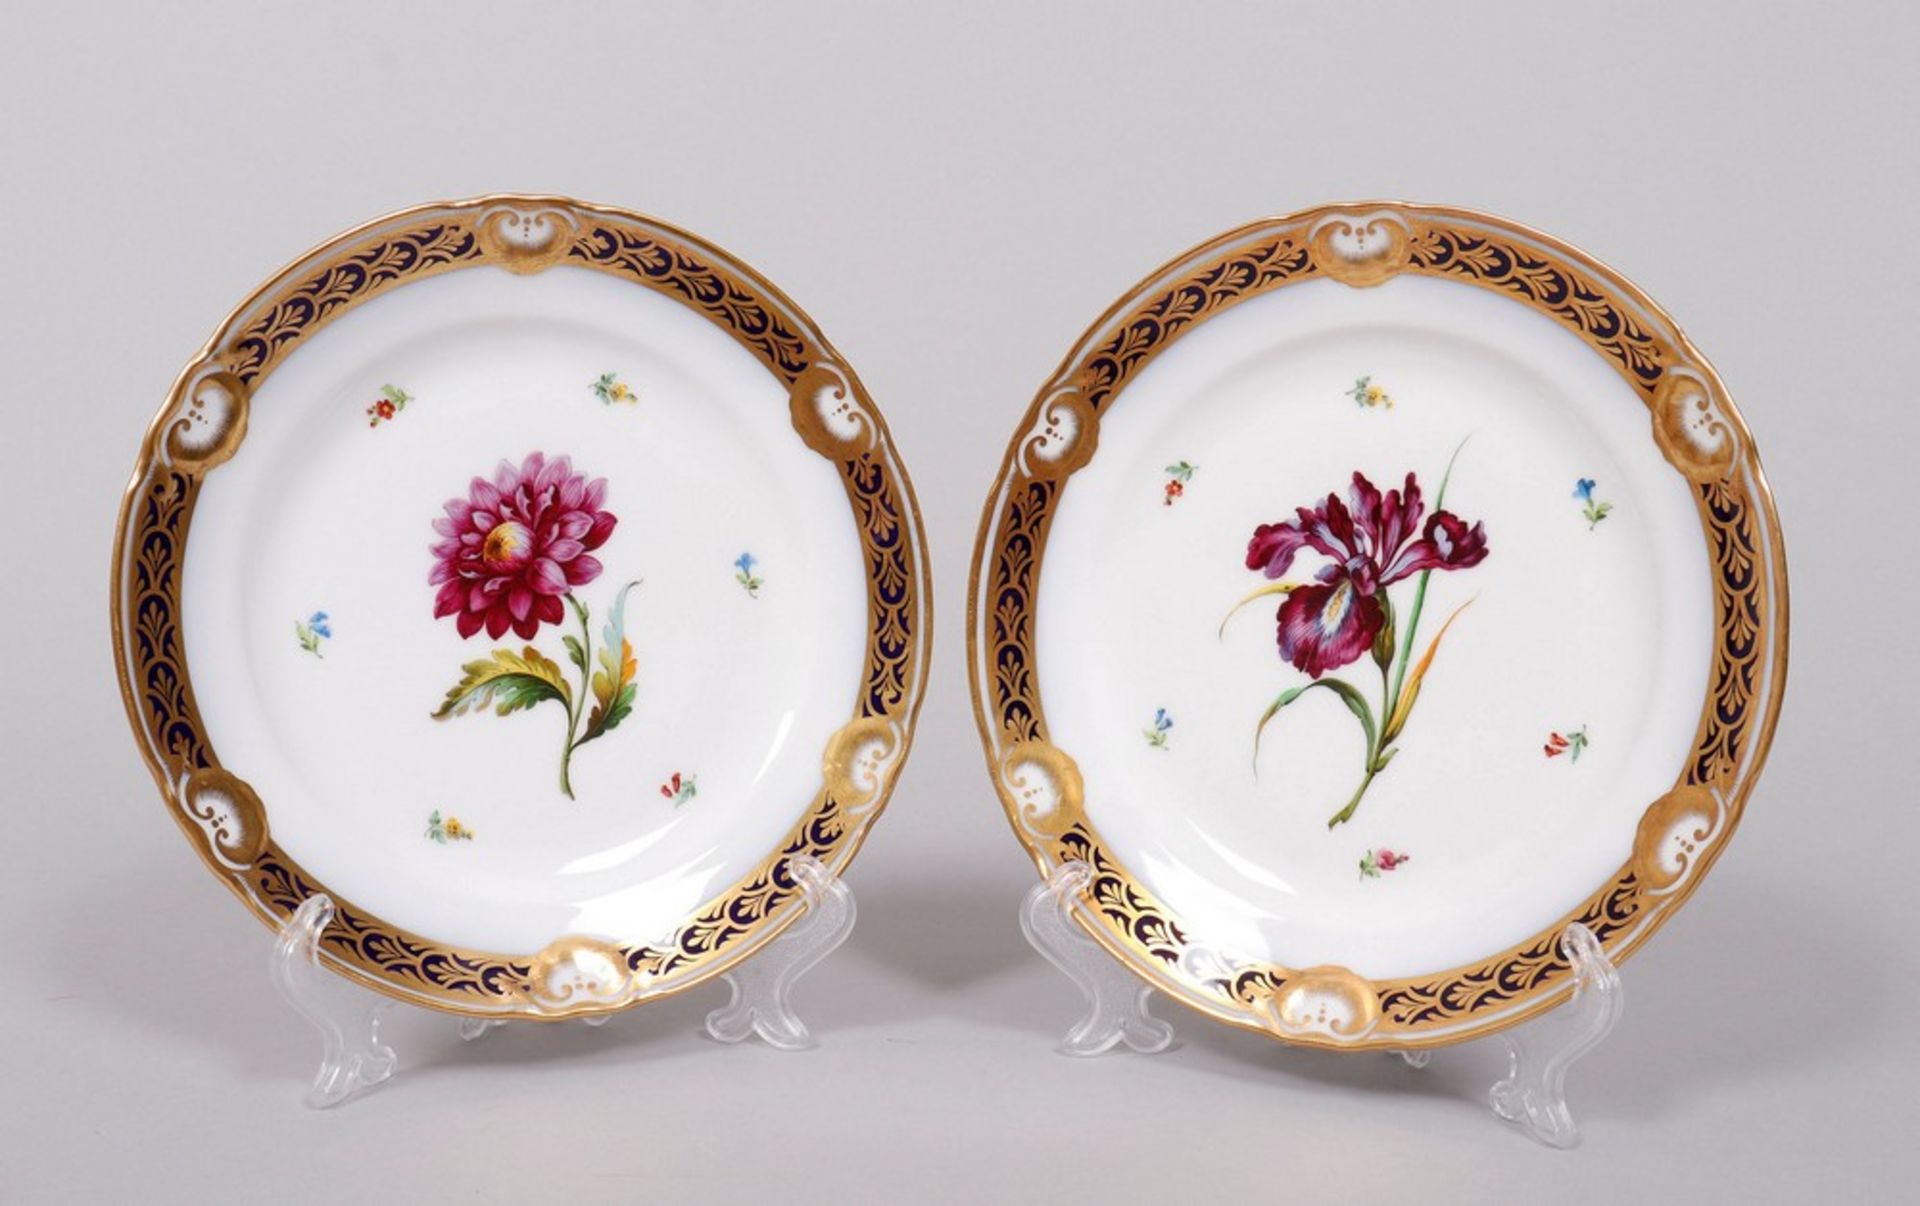 11 cake plates, Imperial Vienna, c. 1808 - Image 9 of 12